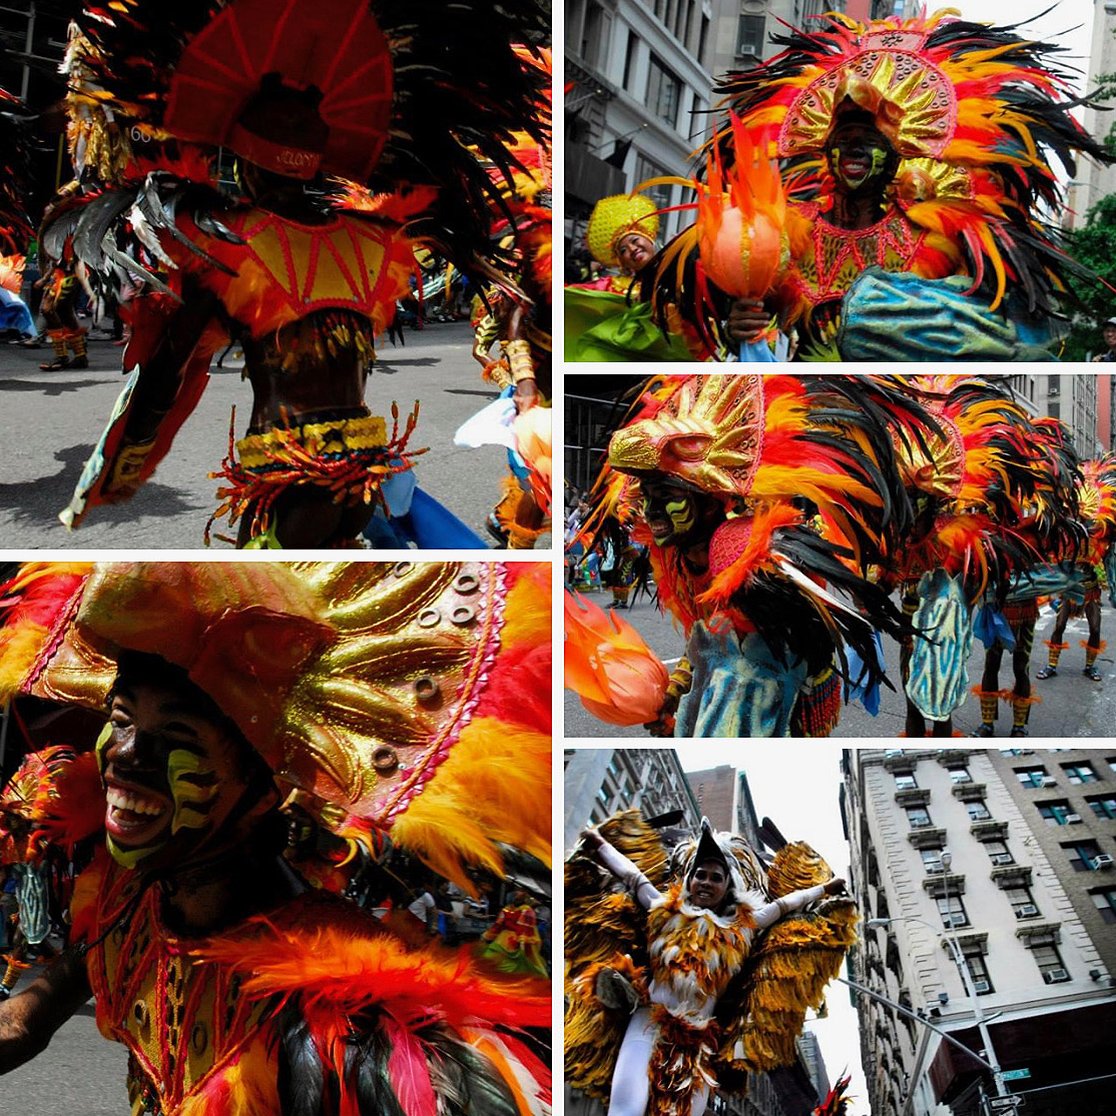 PHILIPPINE INDEPENDENCE DAY PARADE